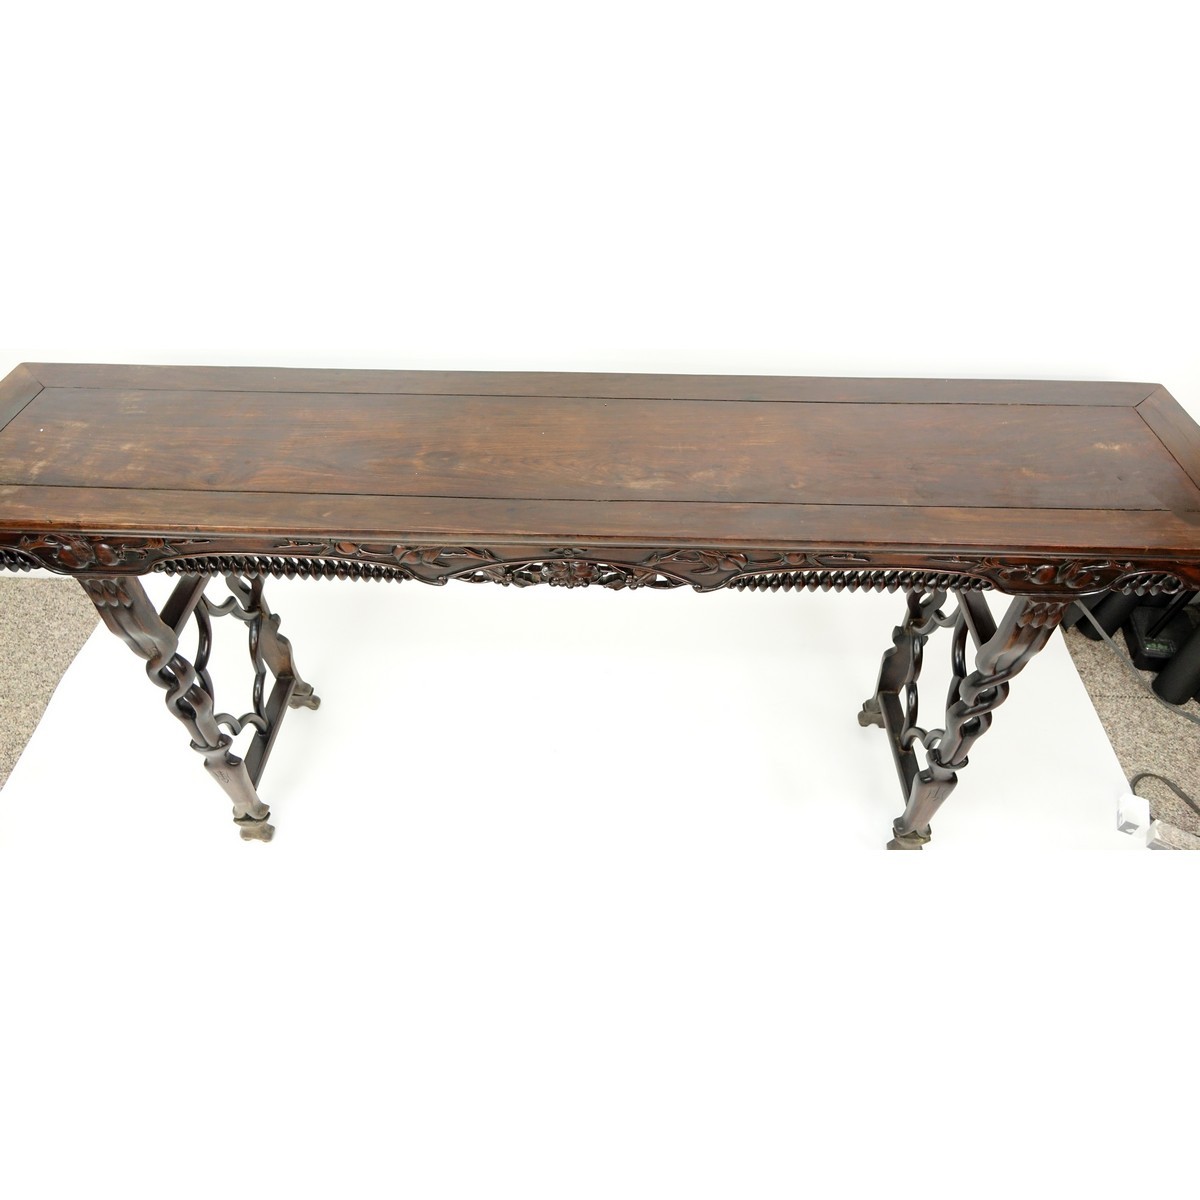 Chinese Deep Carved Rosewood Alter Table. Carved and openwork on apron, deep carved legs.